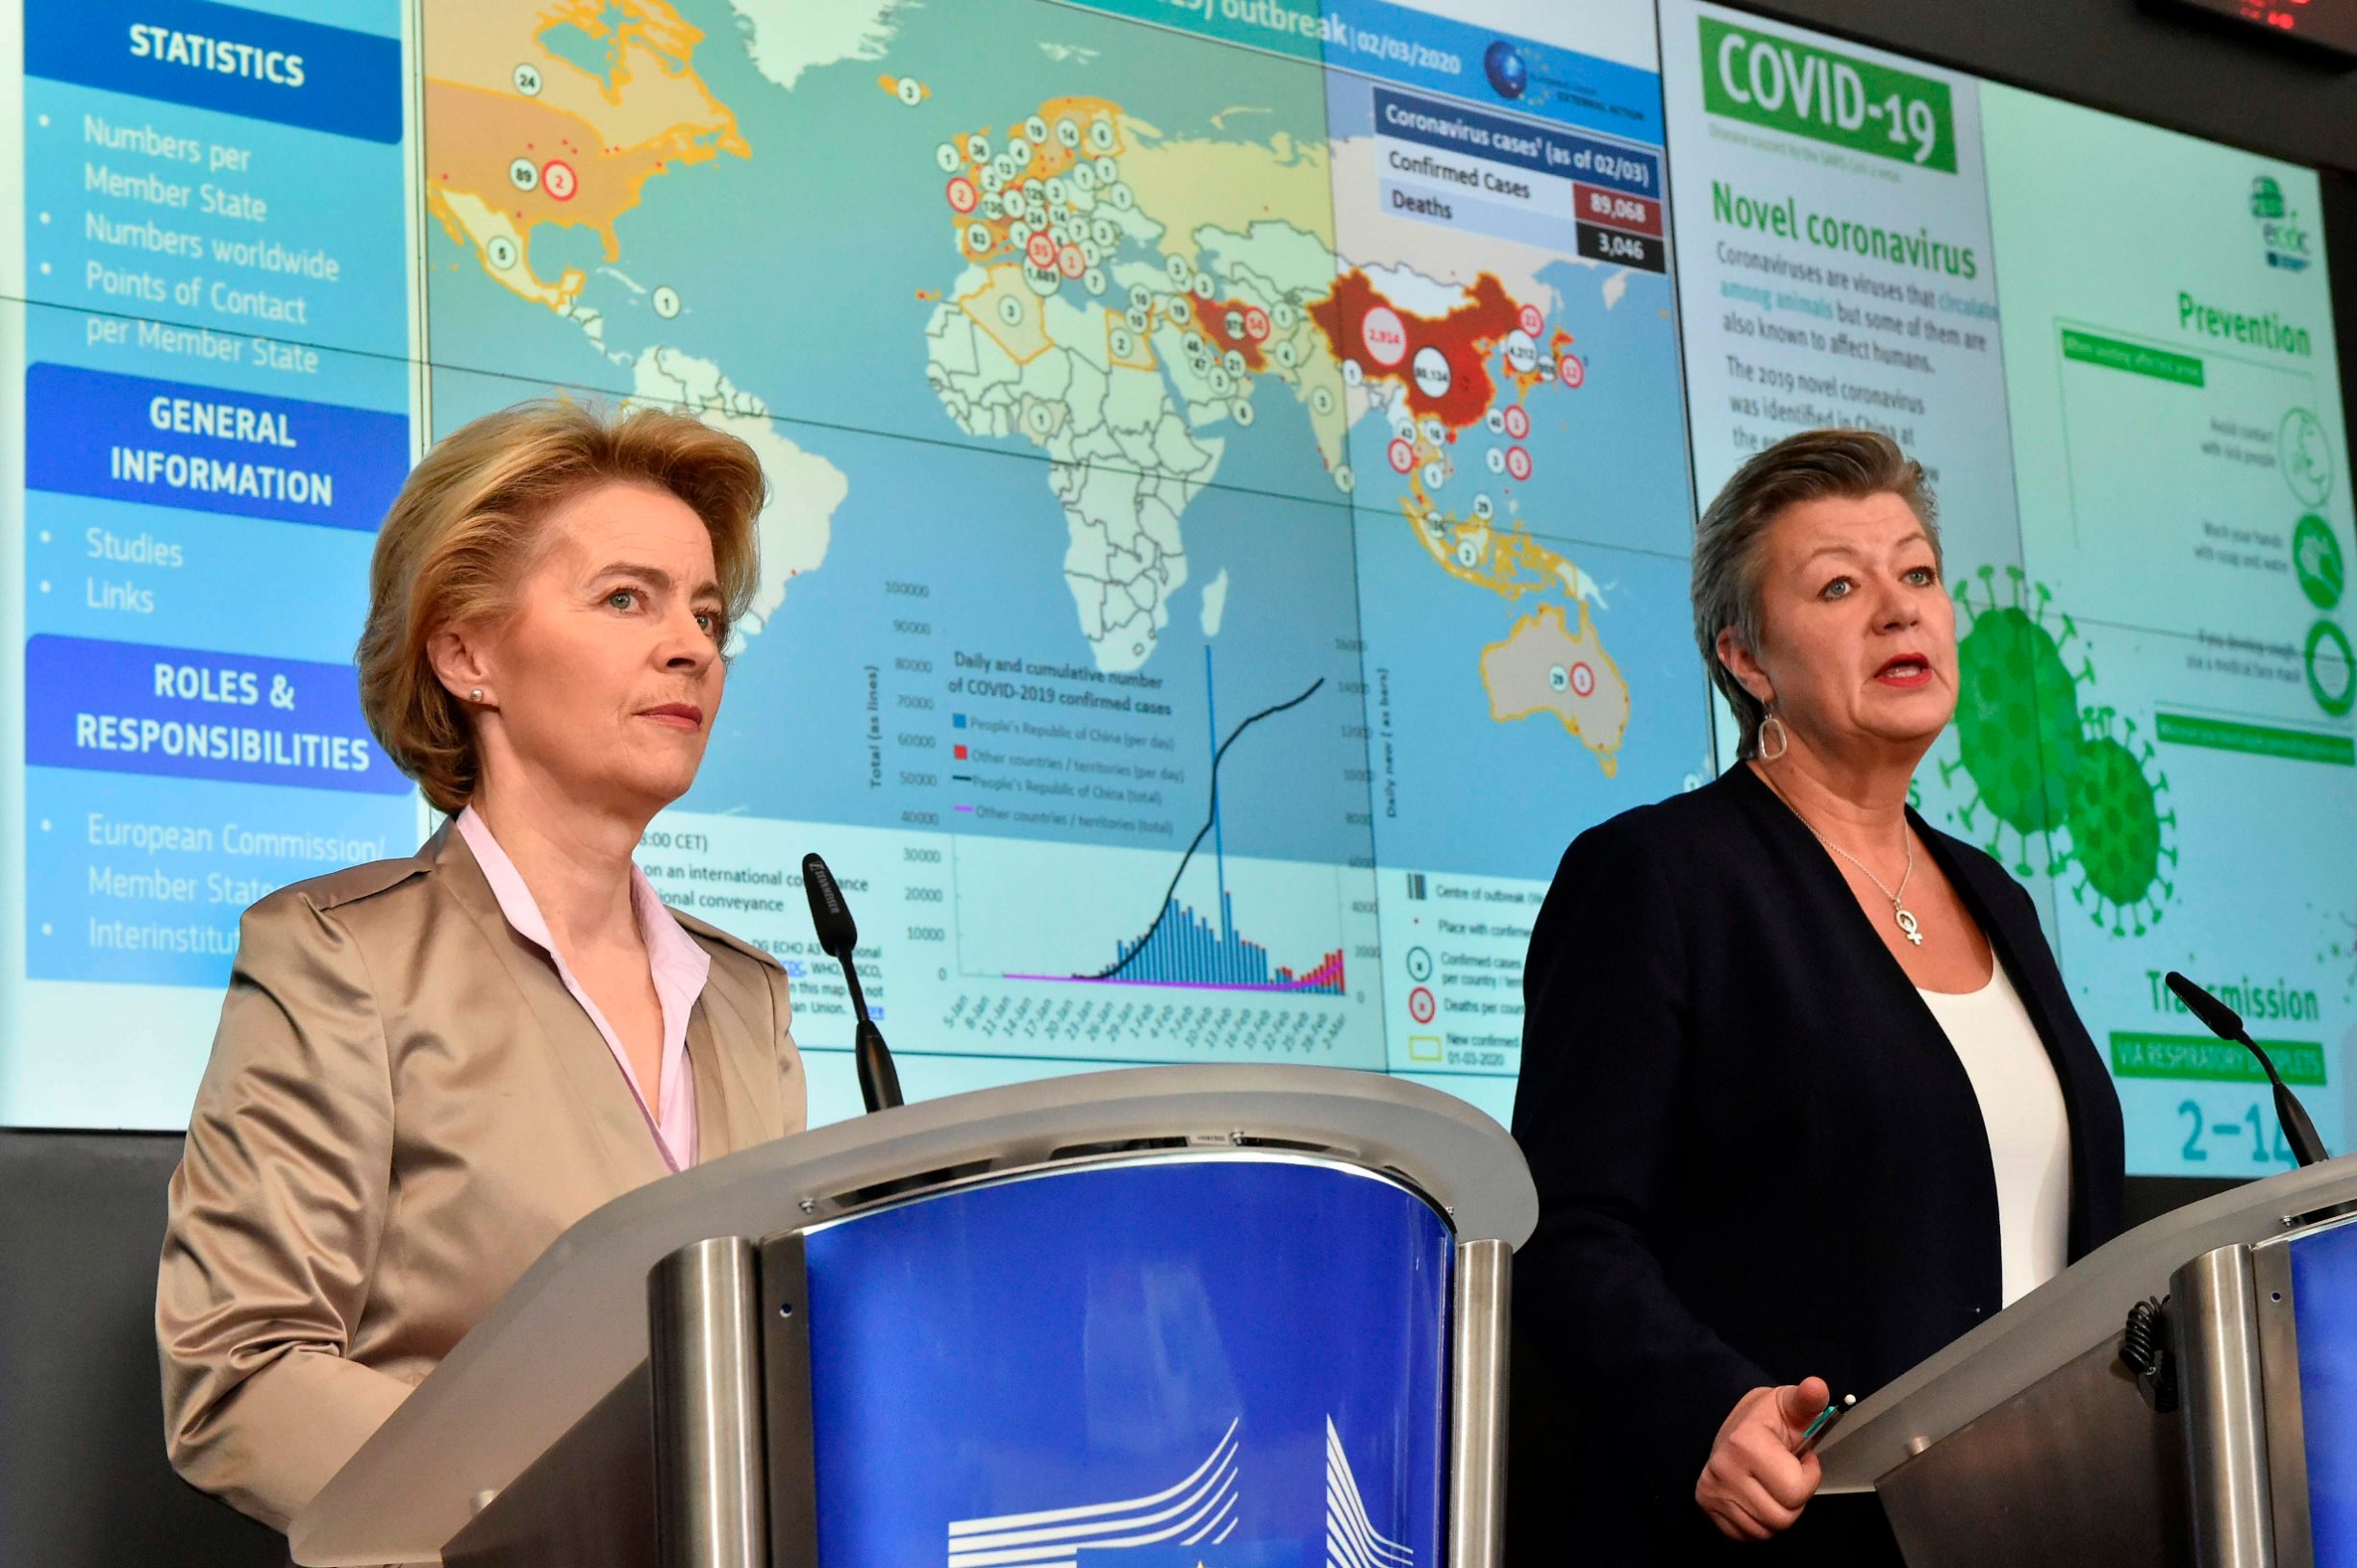 EU commissioner for Home Affairs Sweden's Ylva Johansson (R), gives a press conference flanked by President European Commission President Ursula von der Leyen (L),  held at the Emergency Response Coordination Centre in Brussels, on the EU response to COVID-19,  on March 2, 2020. - The European Union's disease control agency has increased its risk level for the novel coronavirus COVID-19 from moderate to high, EU Commission president Ursula von der Leyen said on March 2, 2020. (Photo by JOHN THYS / AFP)